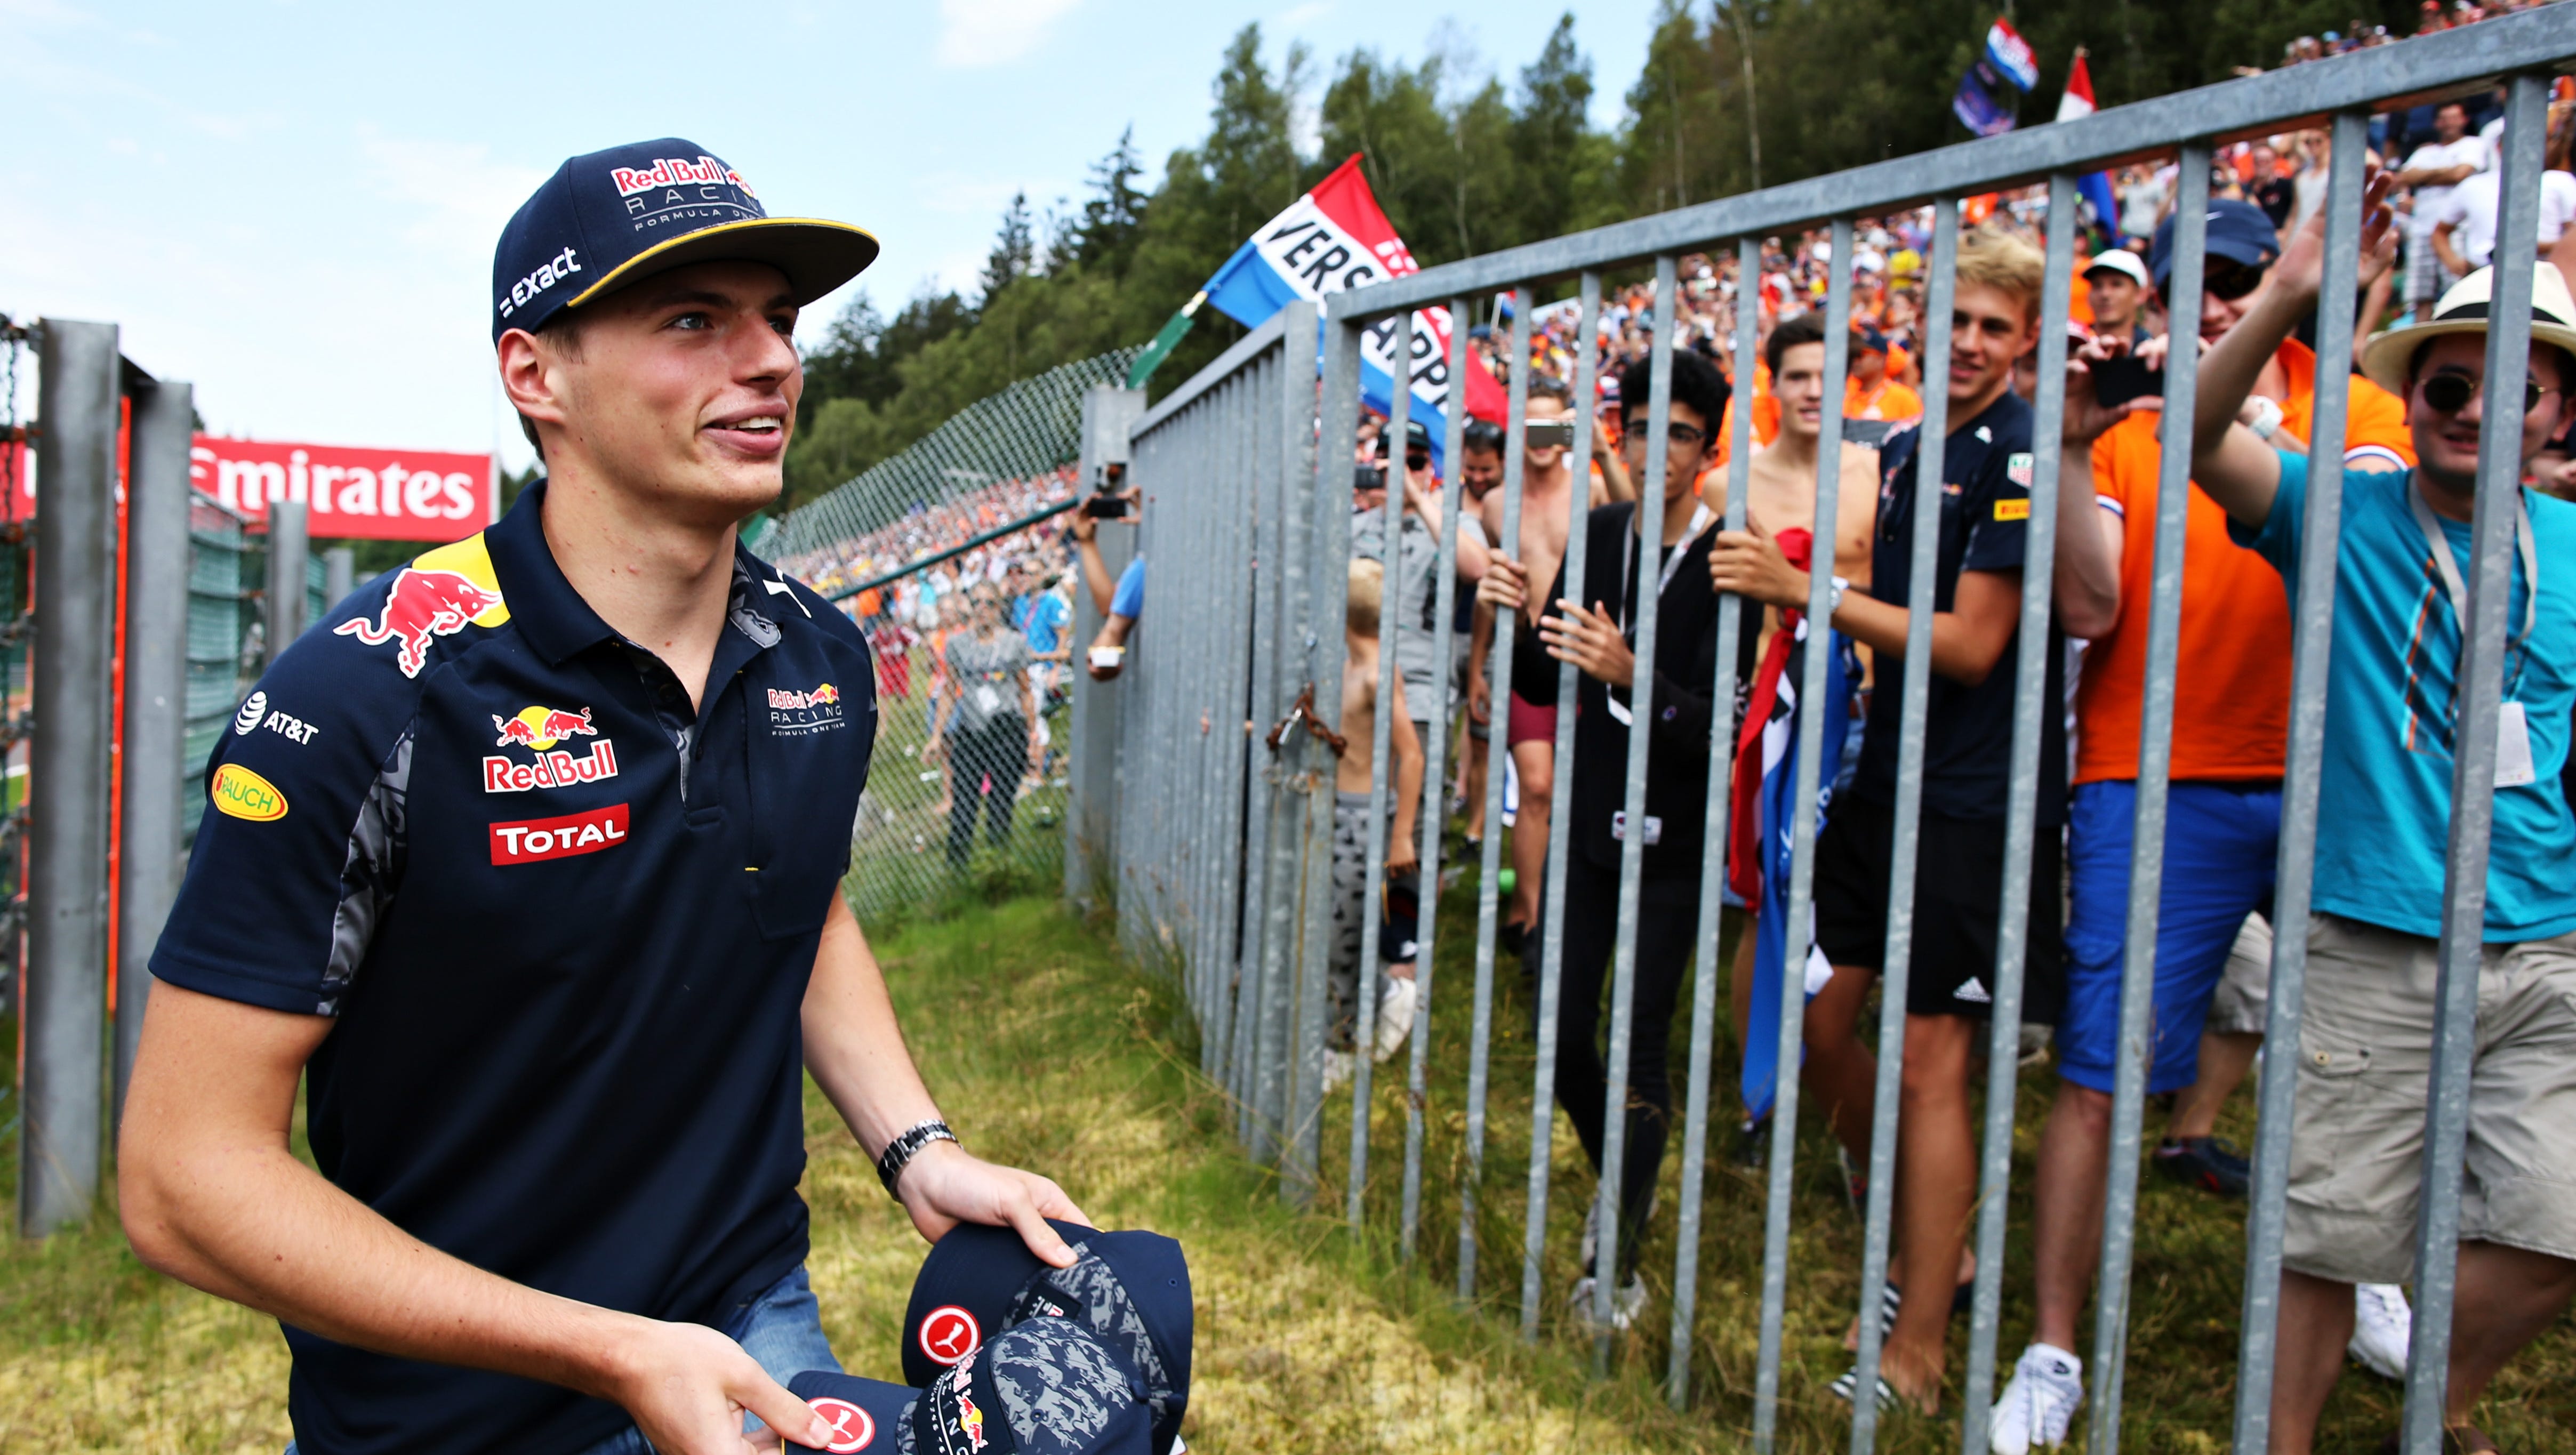 vod Shipley aardappel Wild and fearless Max Verstappen is just what Formula One needs